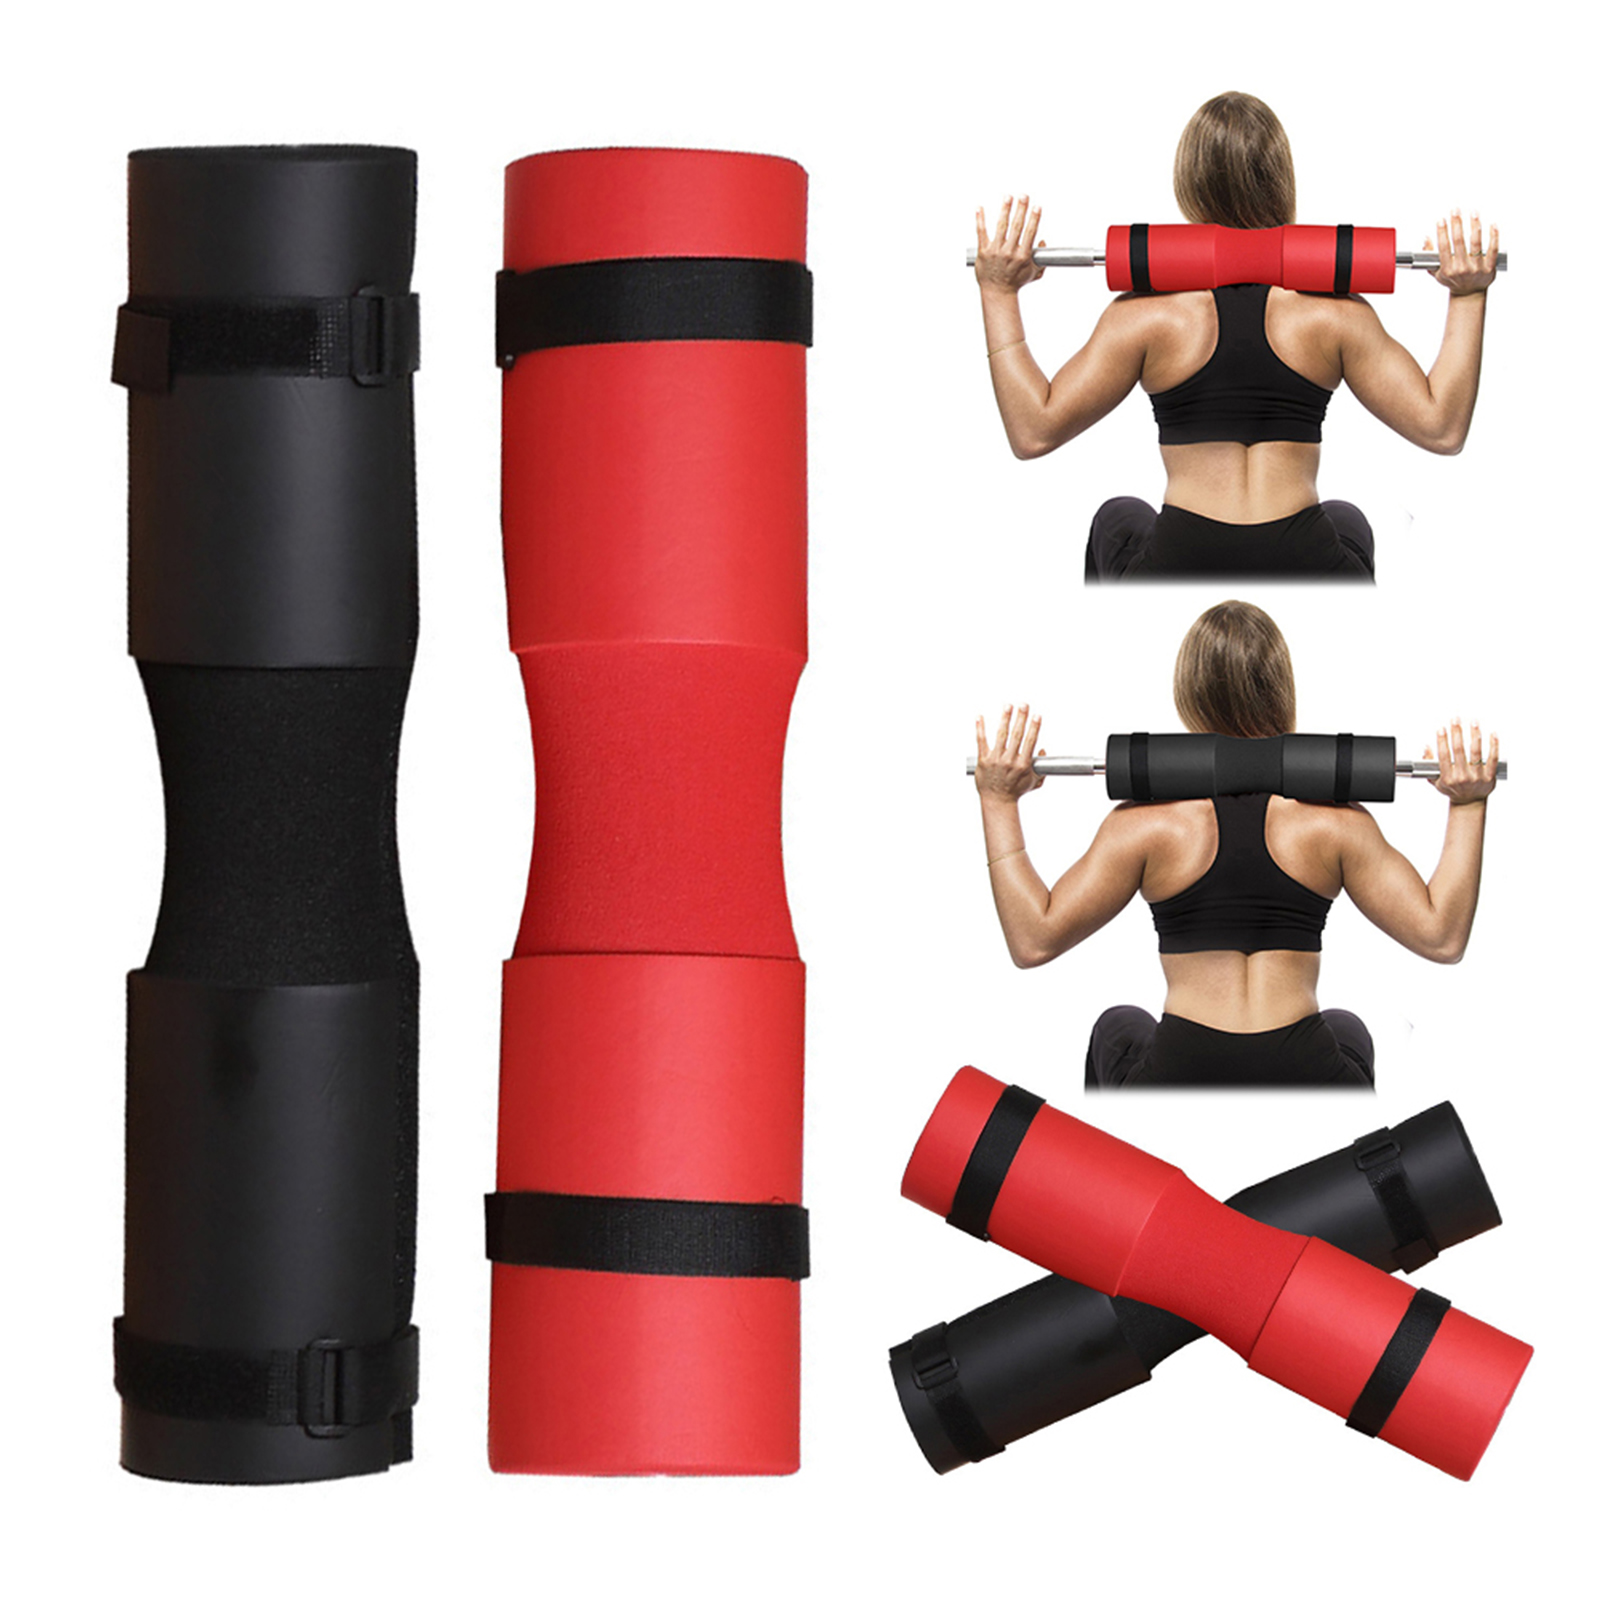 Details about   Weight Lifting Barbell Pad Squat Bar Power lifting Neck Shoulder Protection fits 